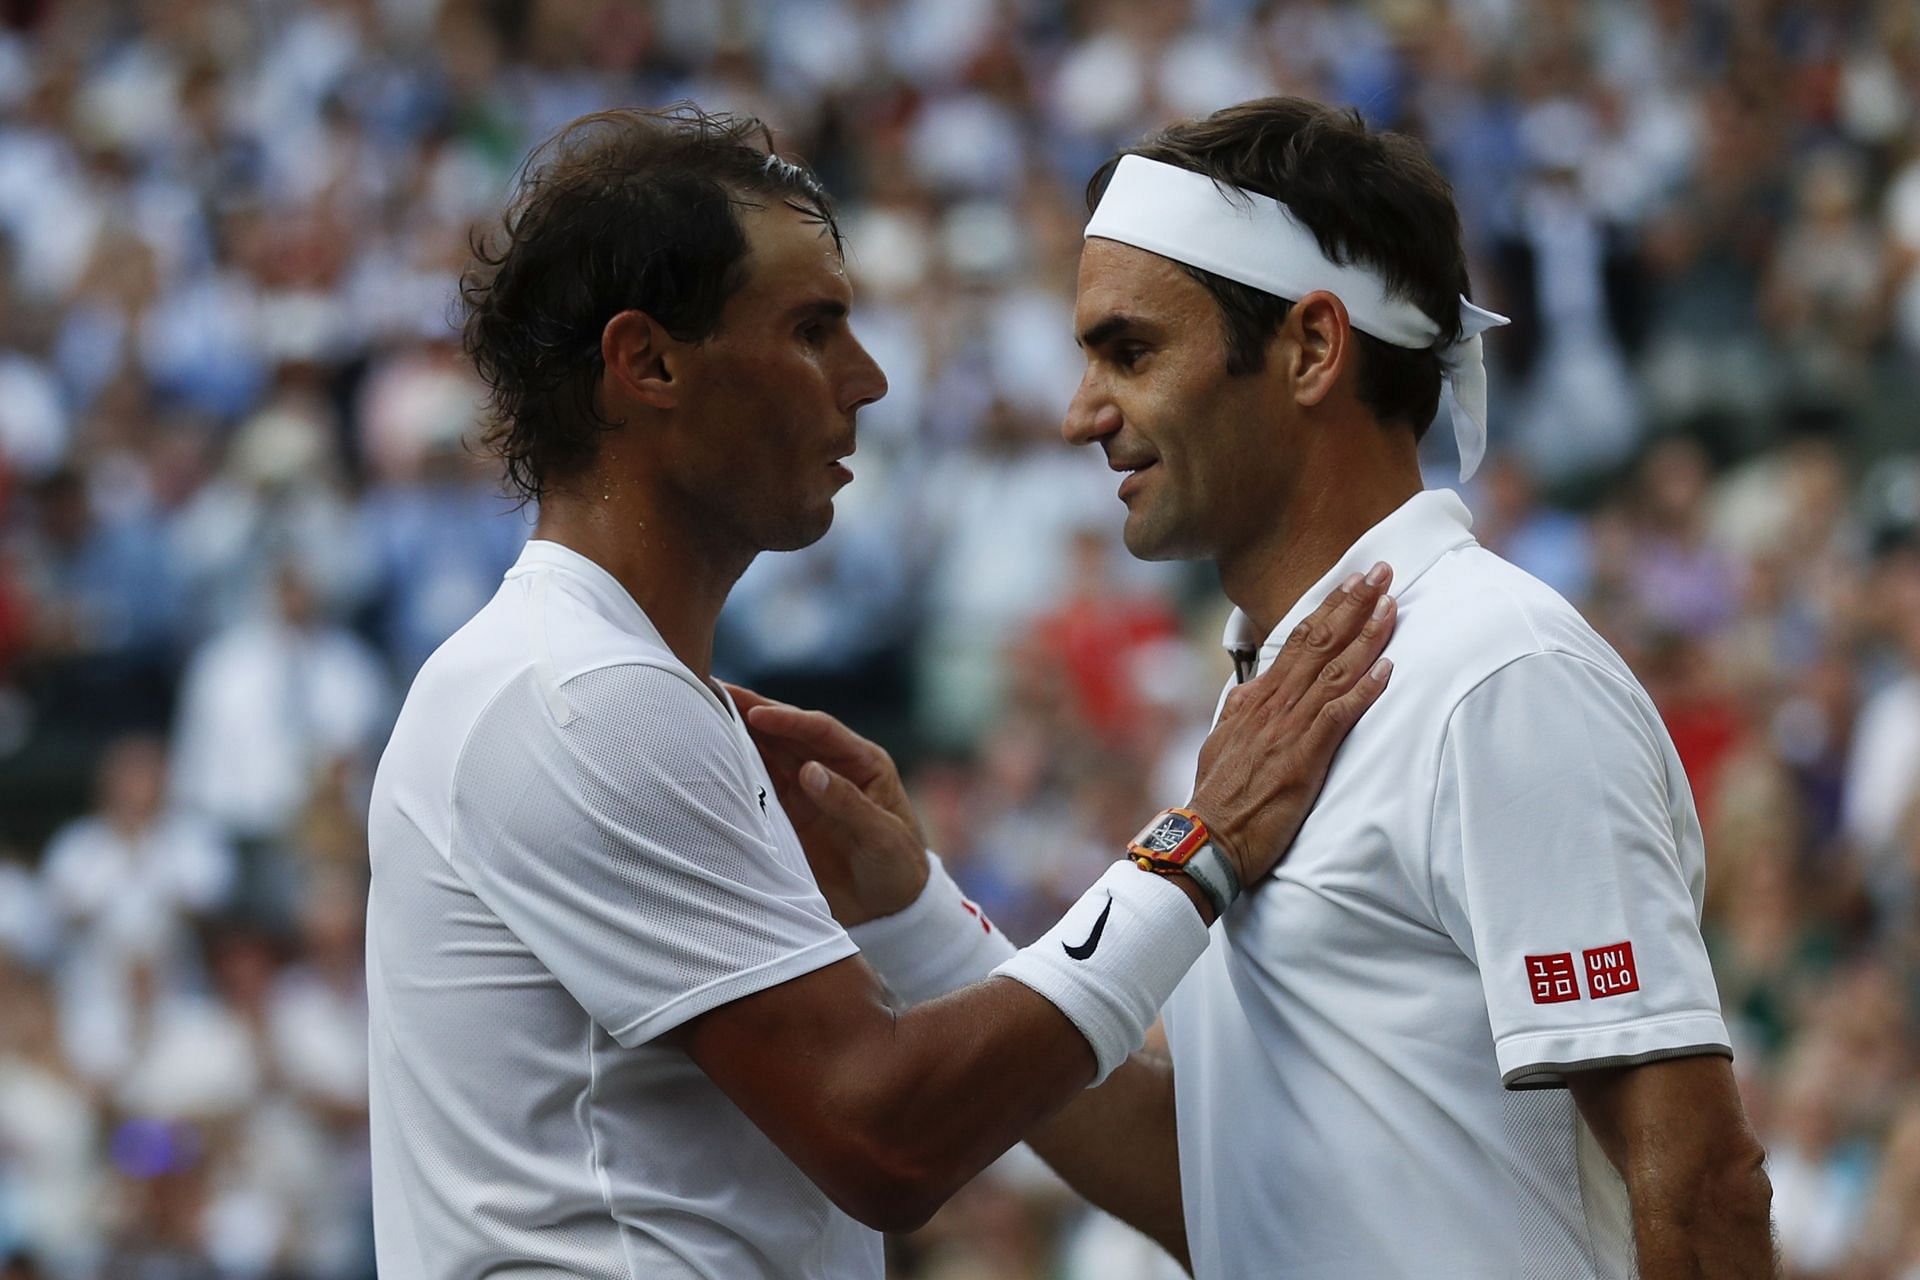 Rafael Nadal and Roger Federer at the Wimbledon Championships 2019